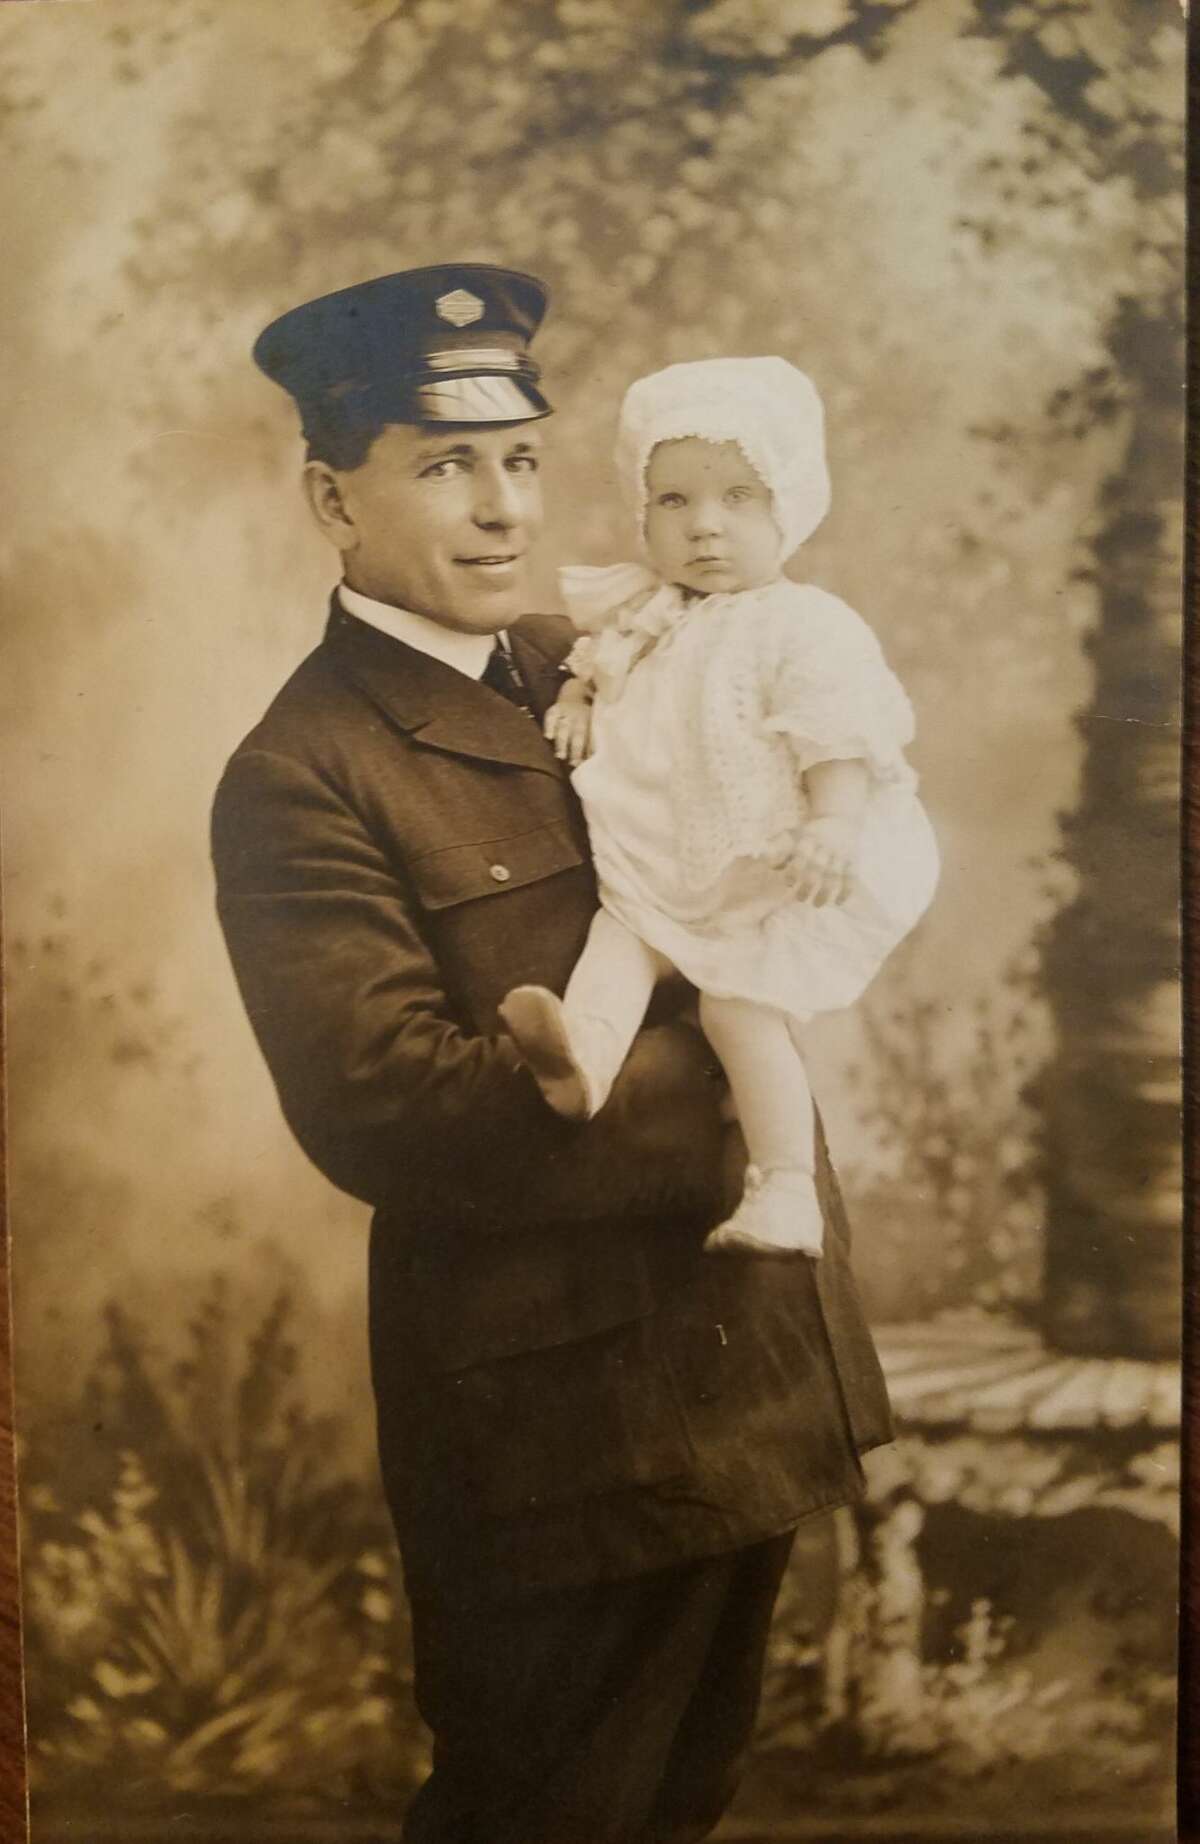 Thomas Goggins, valet and chauffeur to the Mathews family, holding his baby daughter Georgette  circa 1920